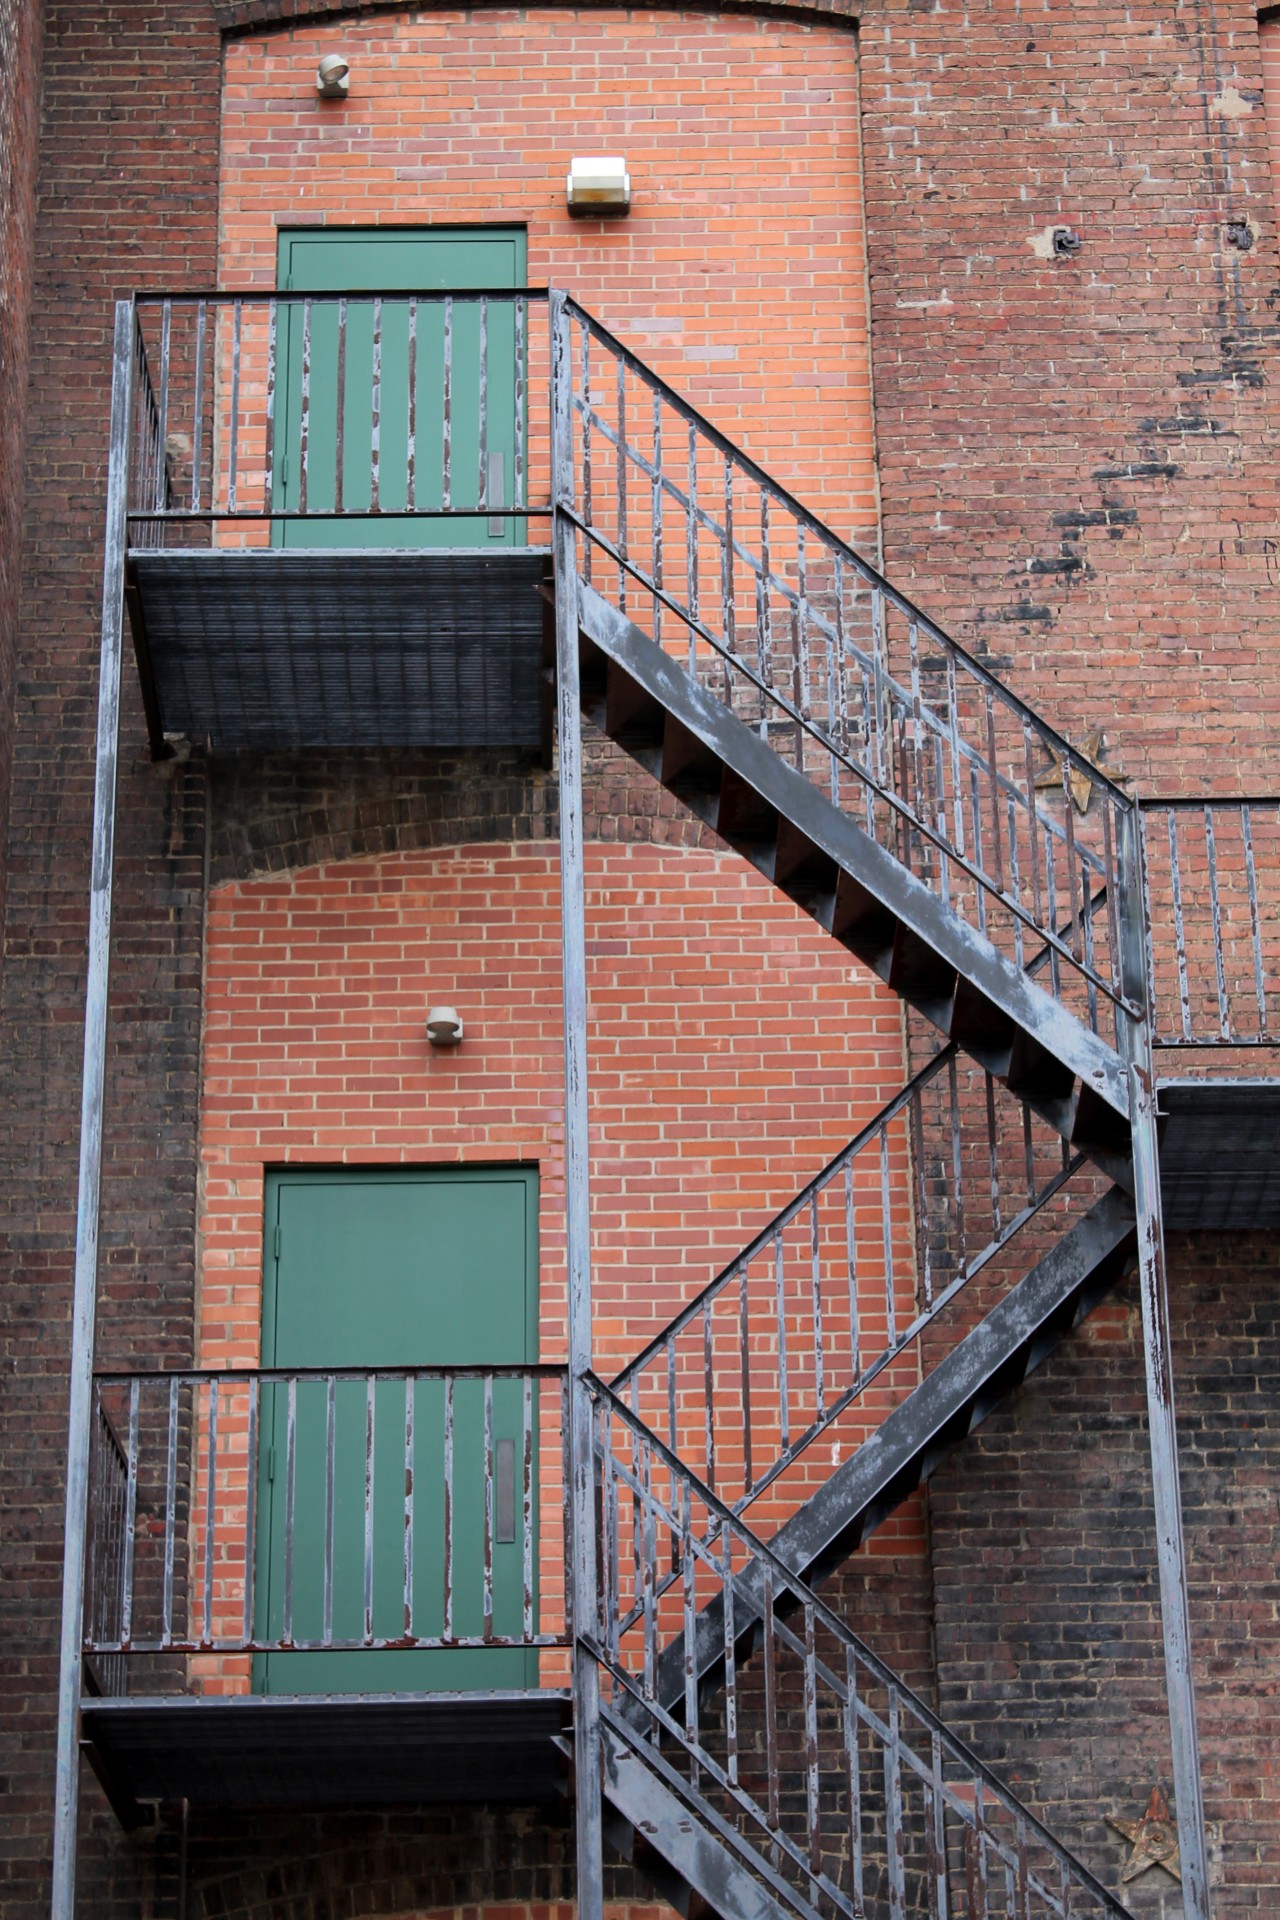 Fire escape on the side of an old brick building - I really appreciate your premium download!